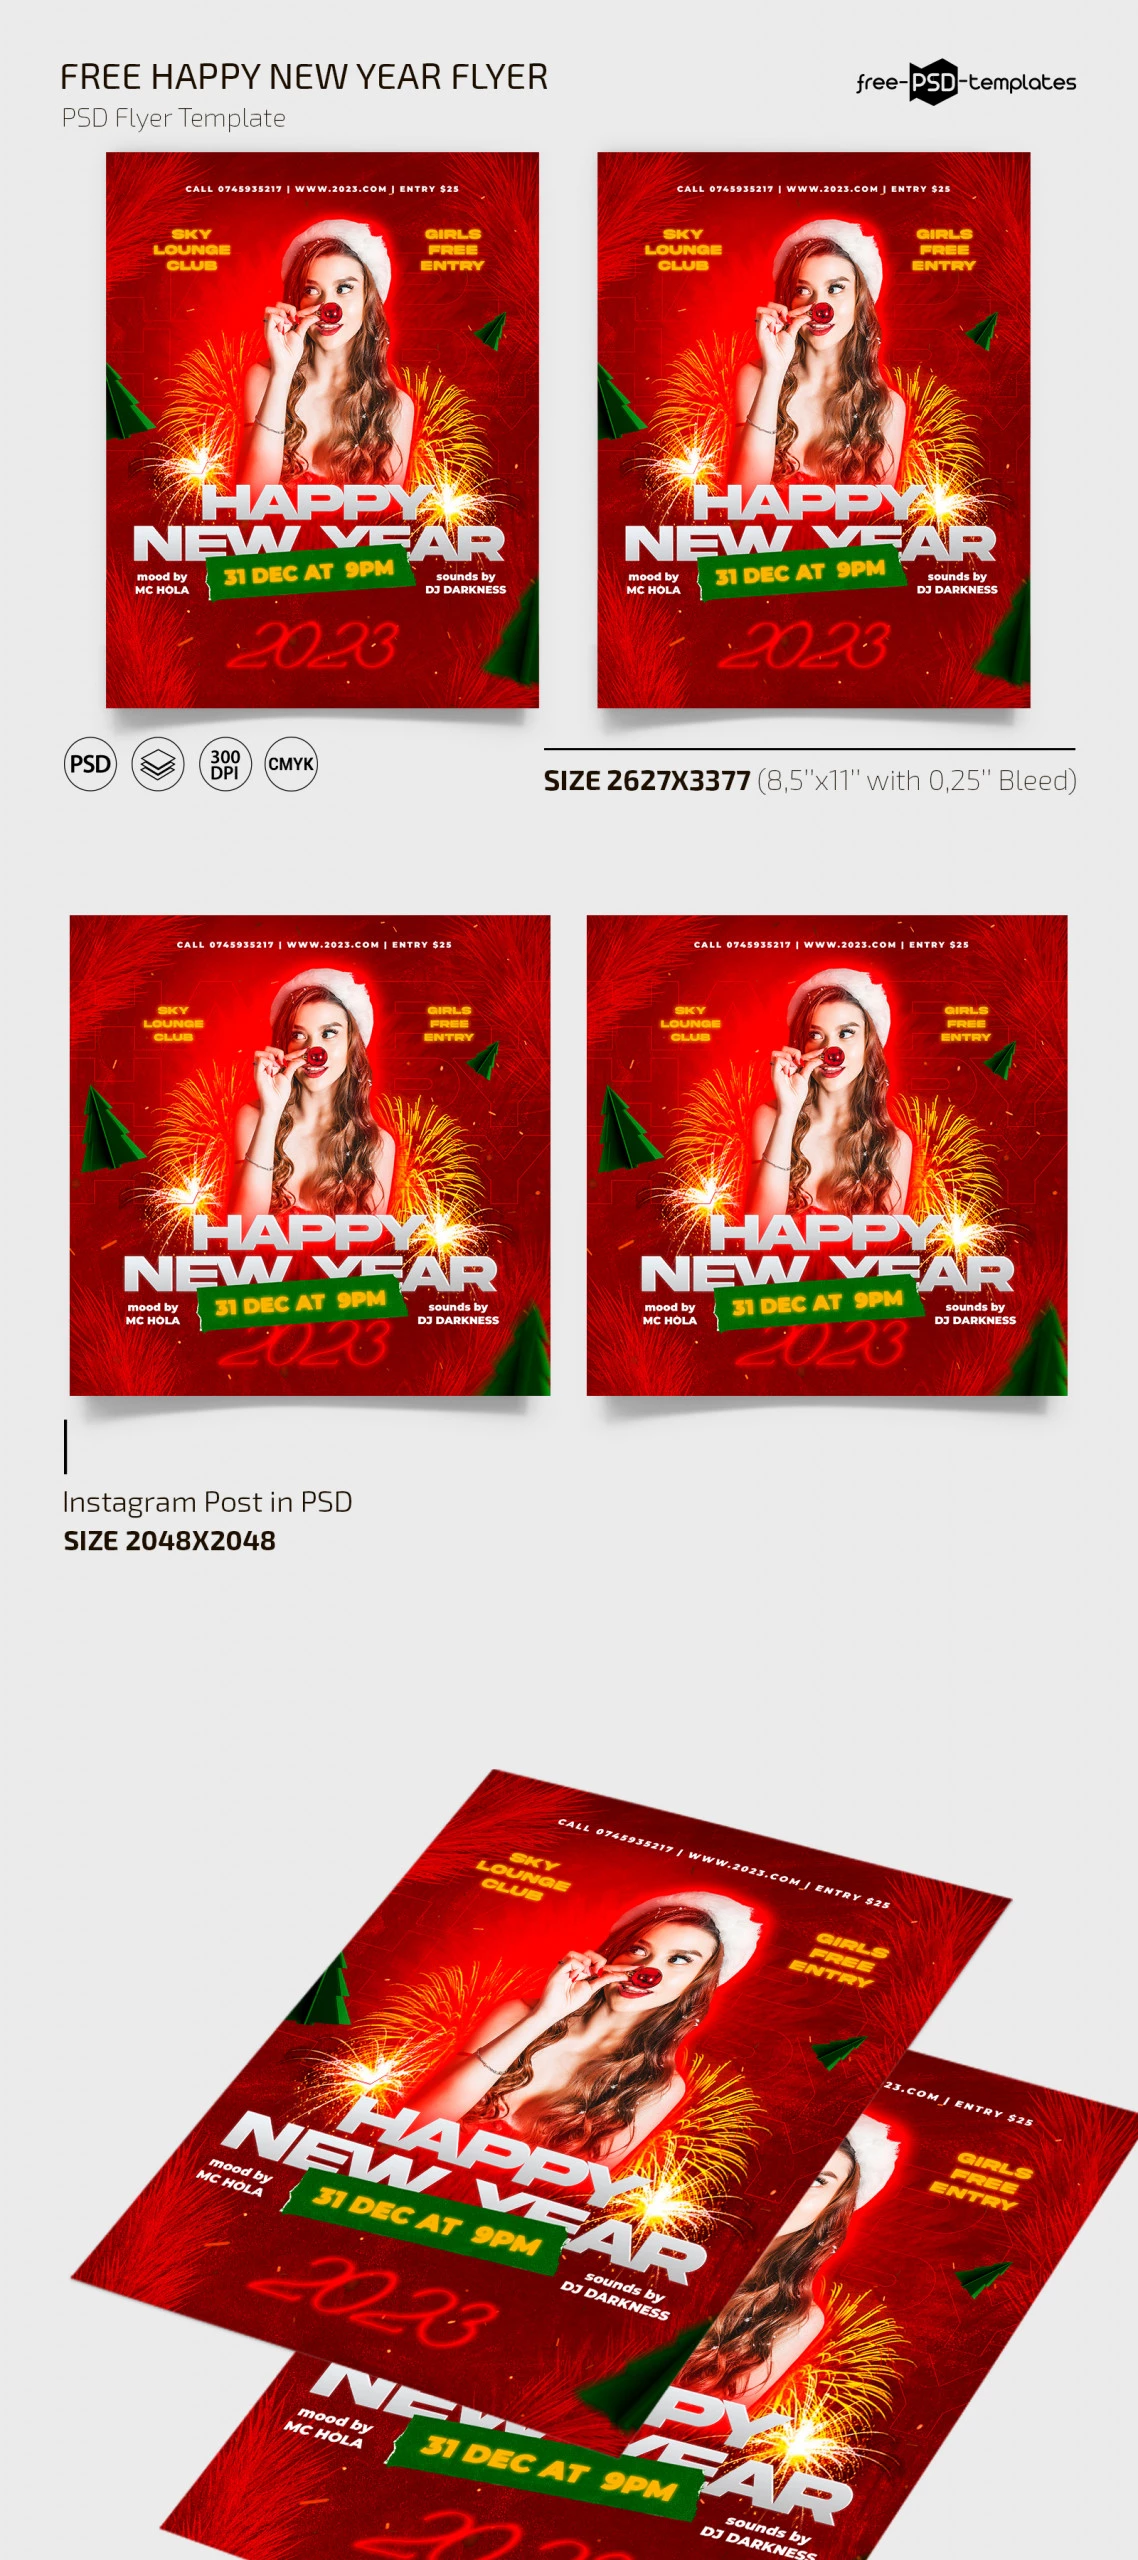 Free Happy New Year Flyer Template + Instagram Post (PSD)